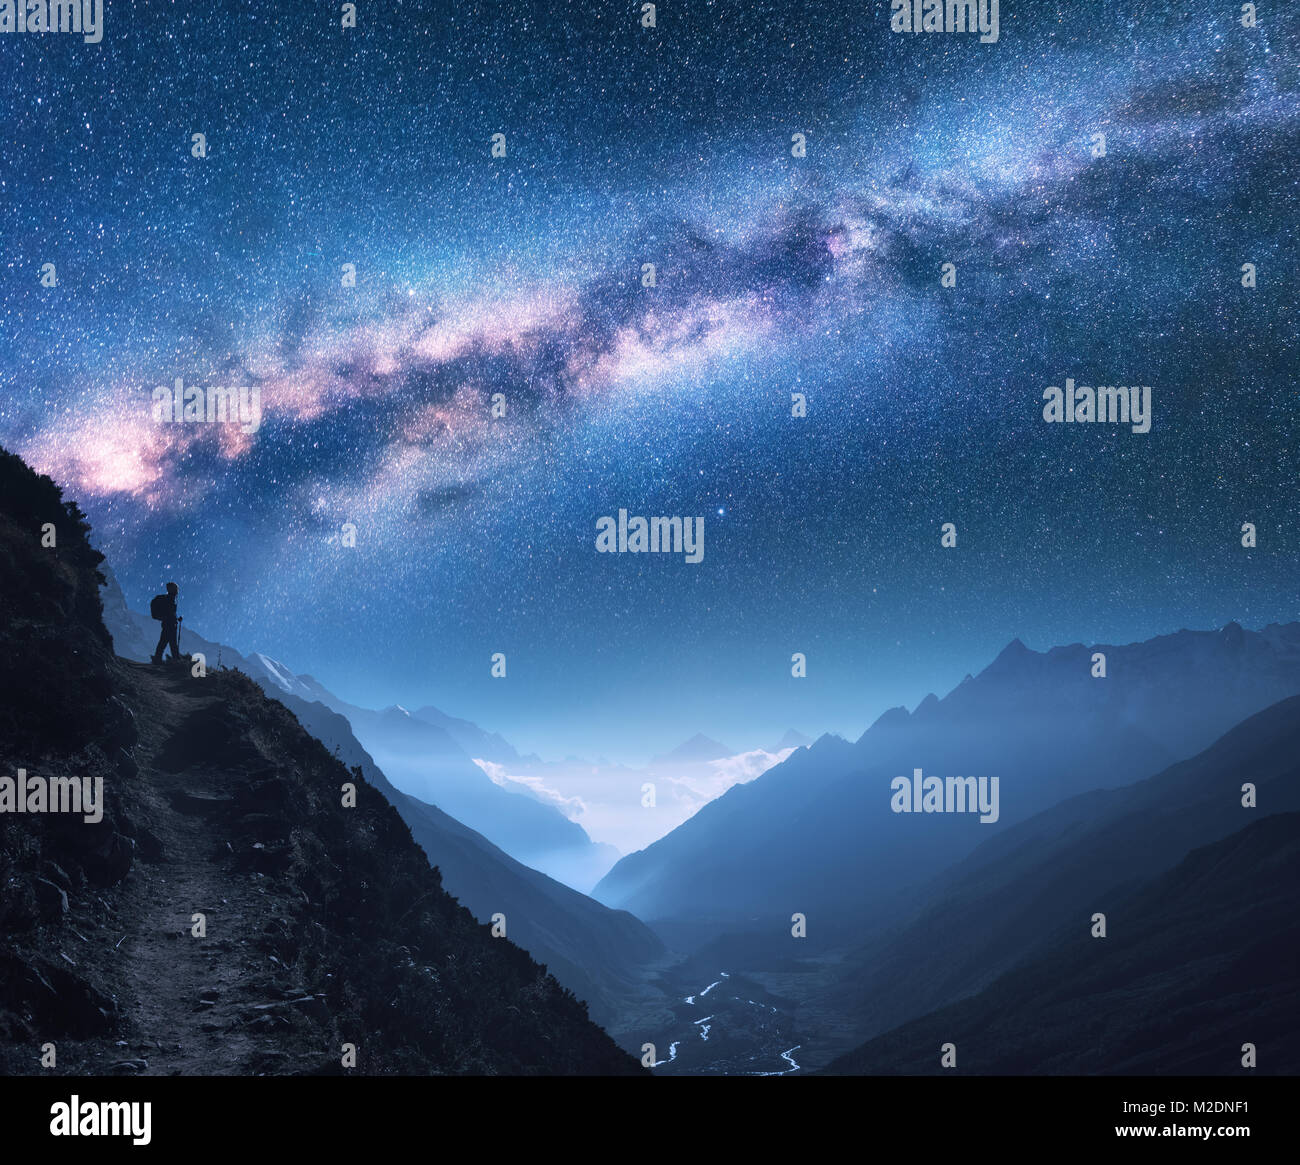 Space with Milky Way, girl and mountains. Silhouette of standing woman on the mountain peak, mountains and starry sky at night in Nepal. Sky with star Stock Photo